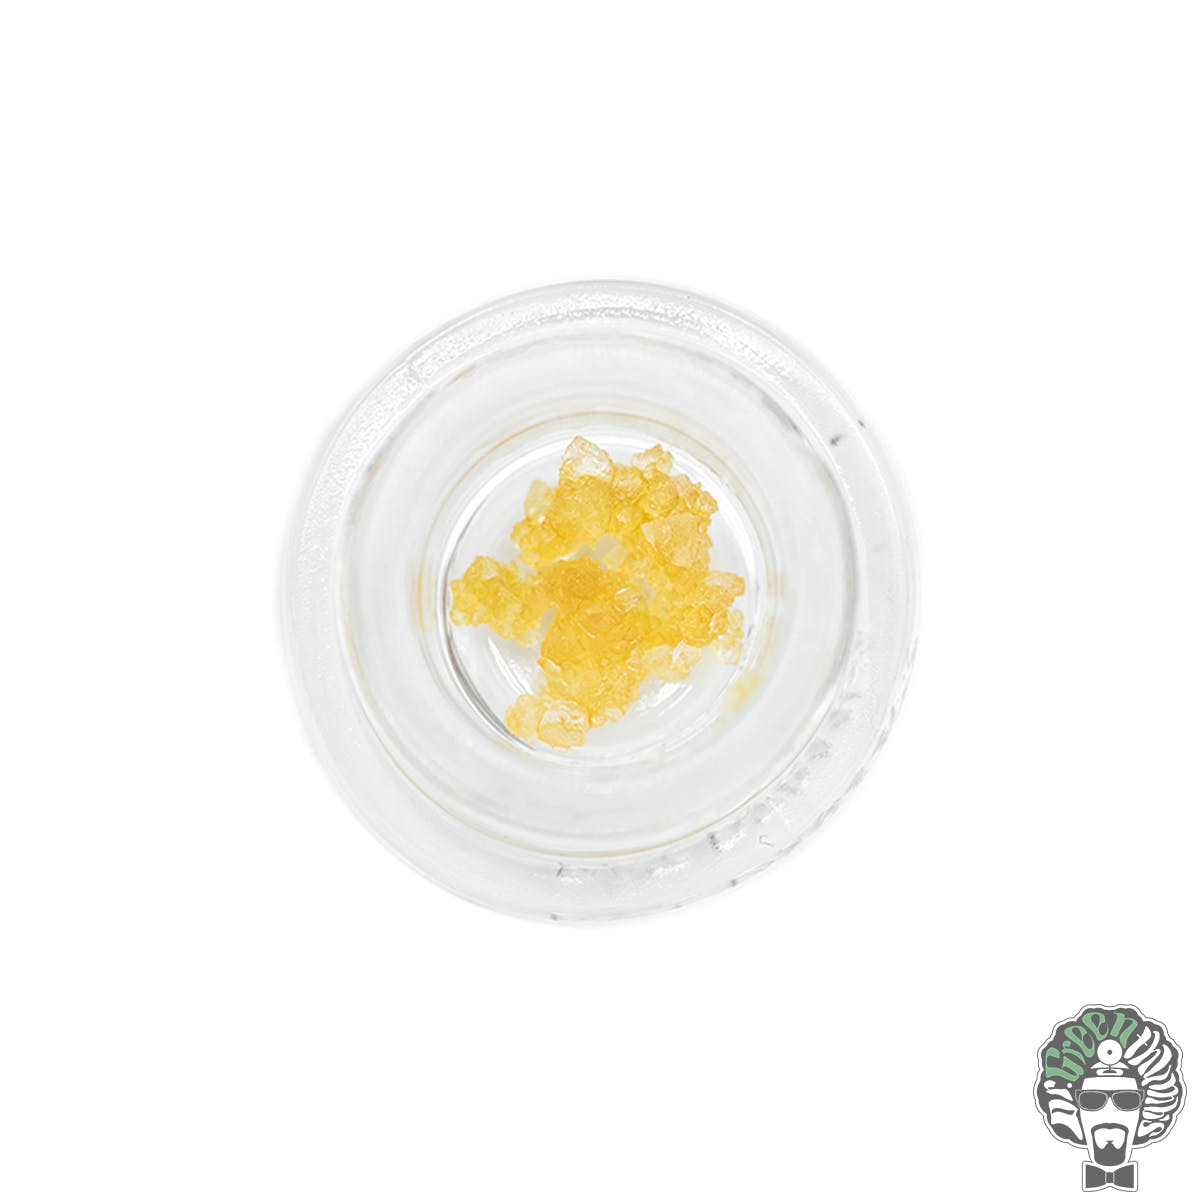 Golden State Banana Live Resin THC-A By Moxie